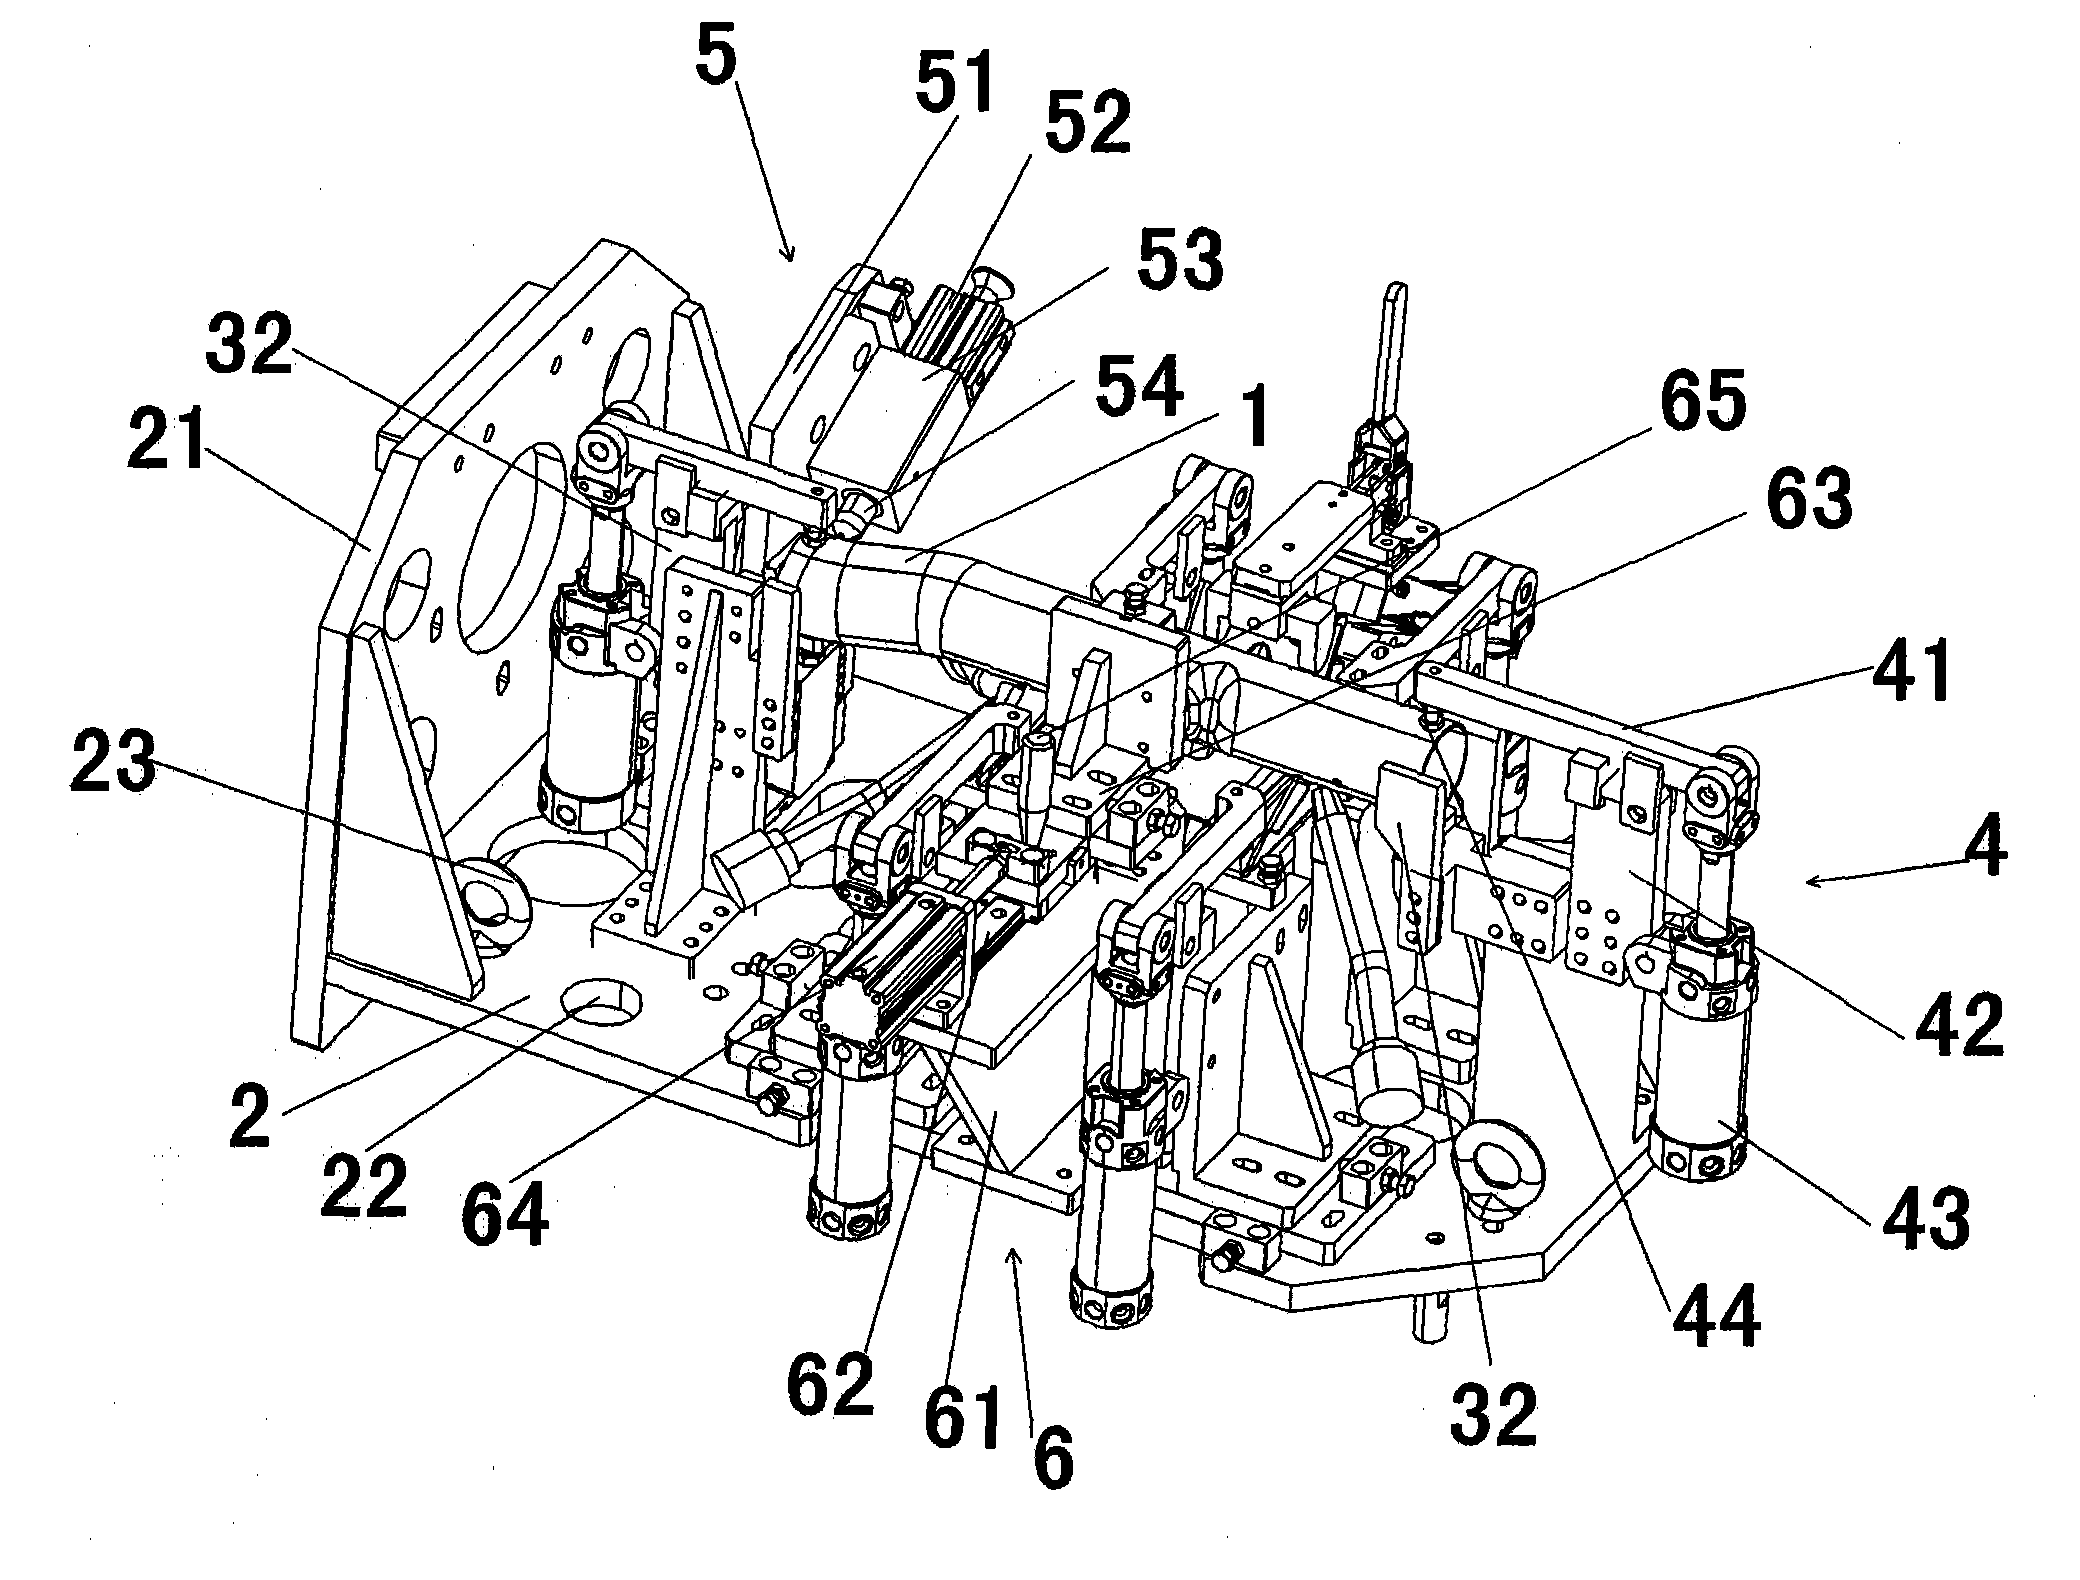 Clamp for manufacturing lower bracket of automobile redirector